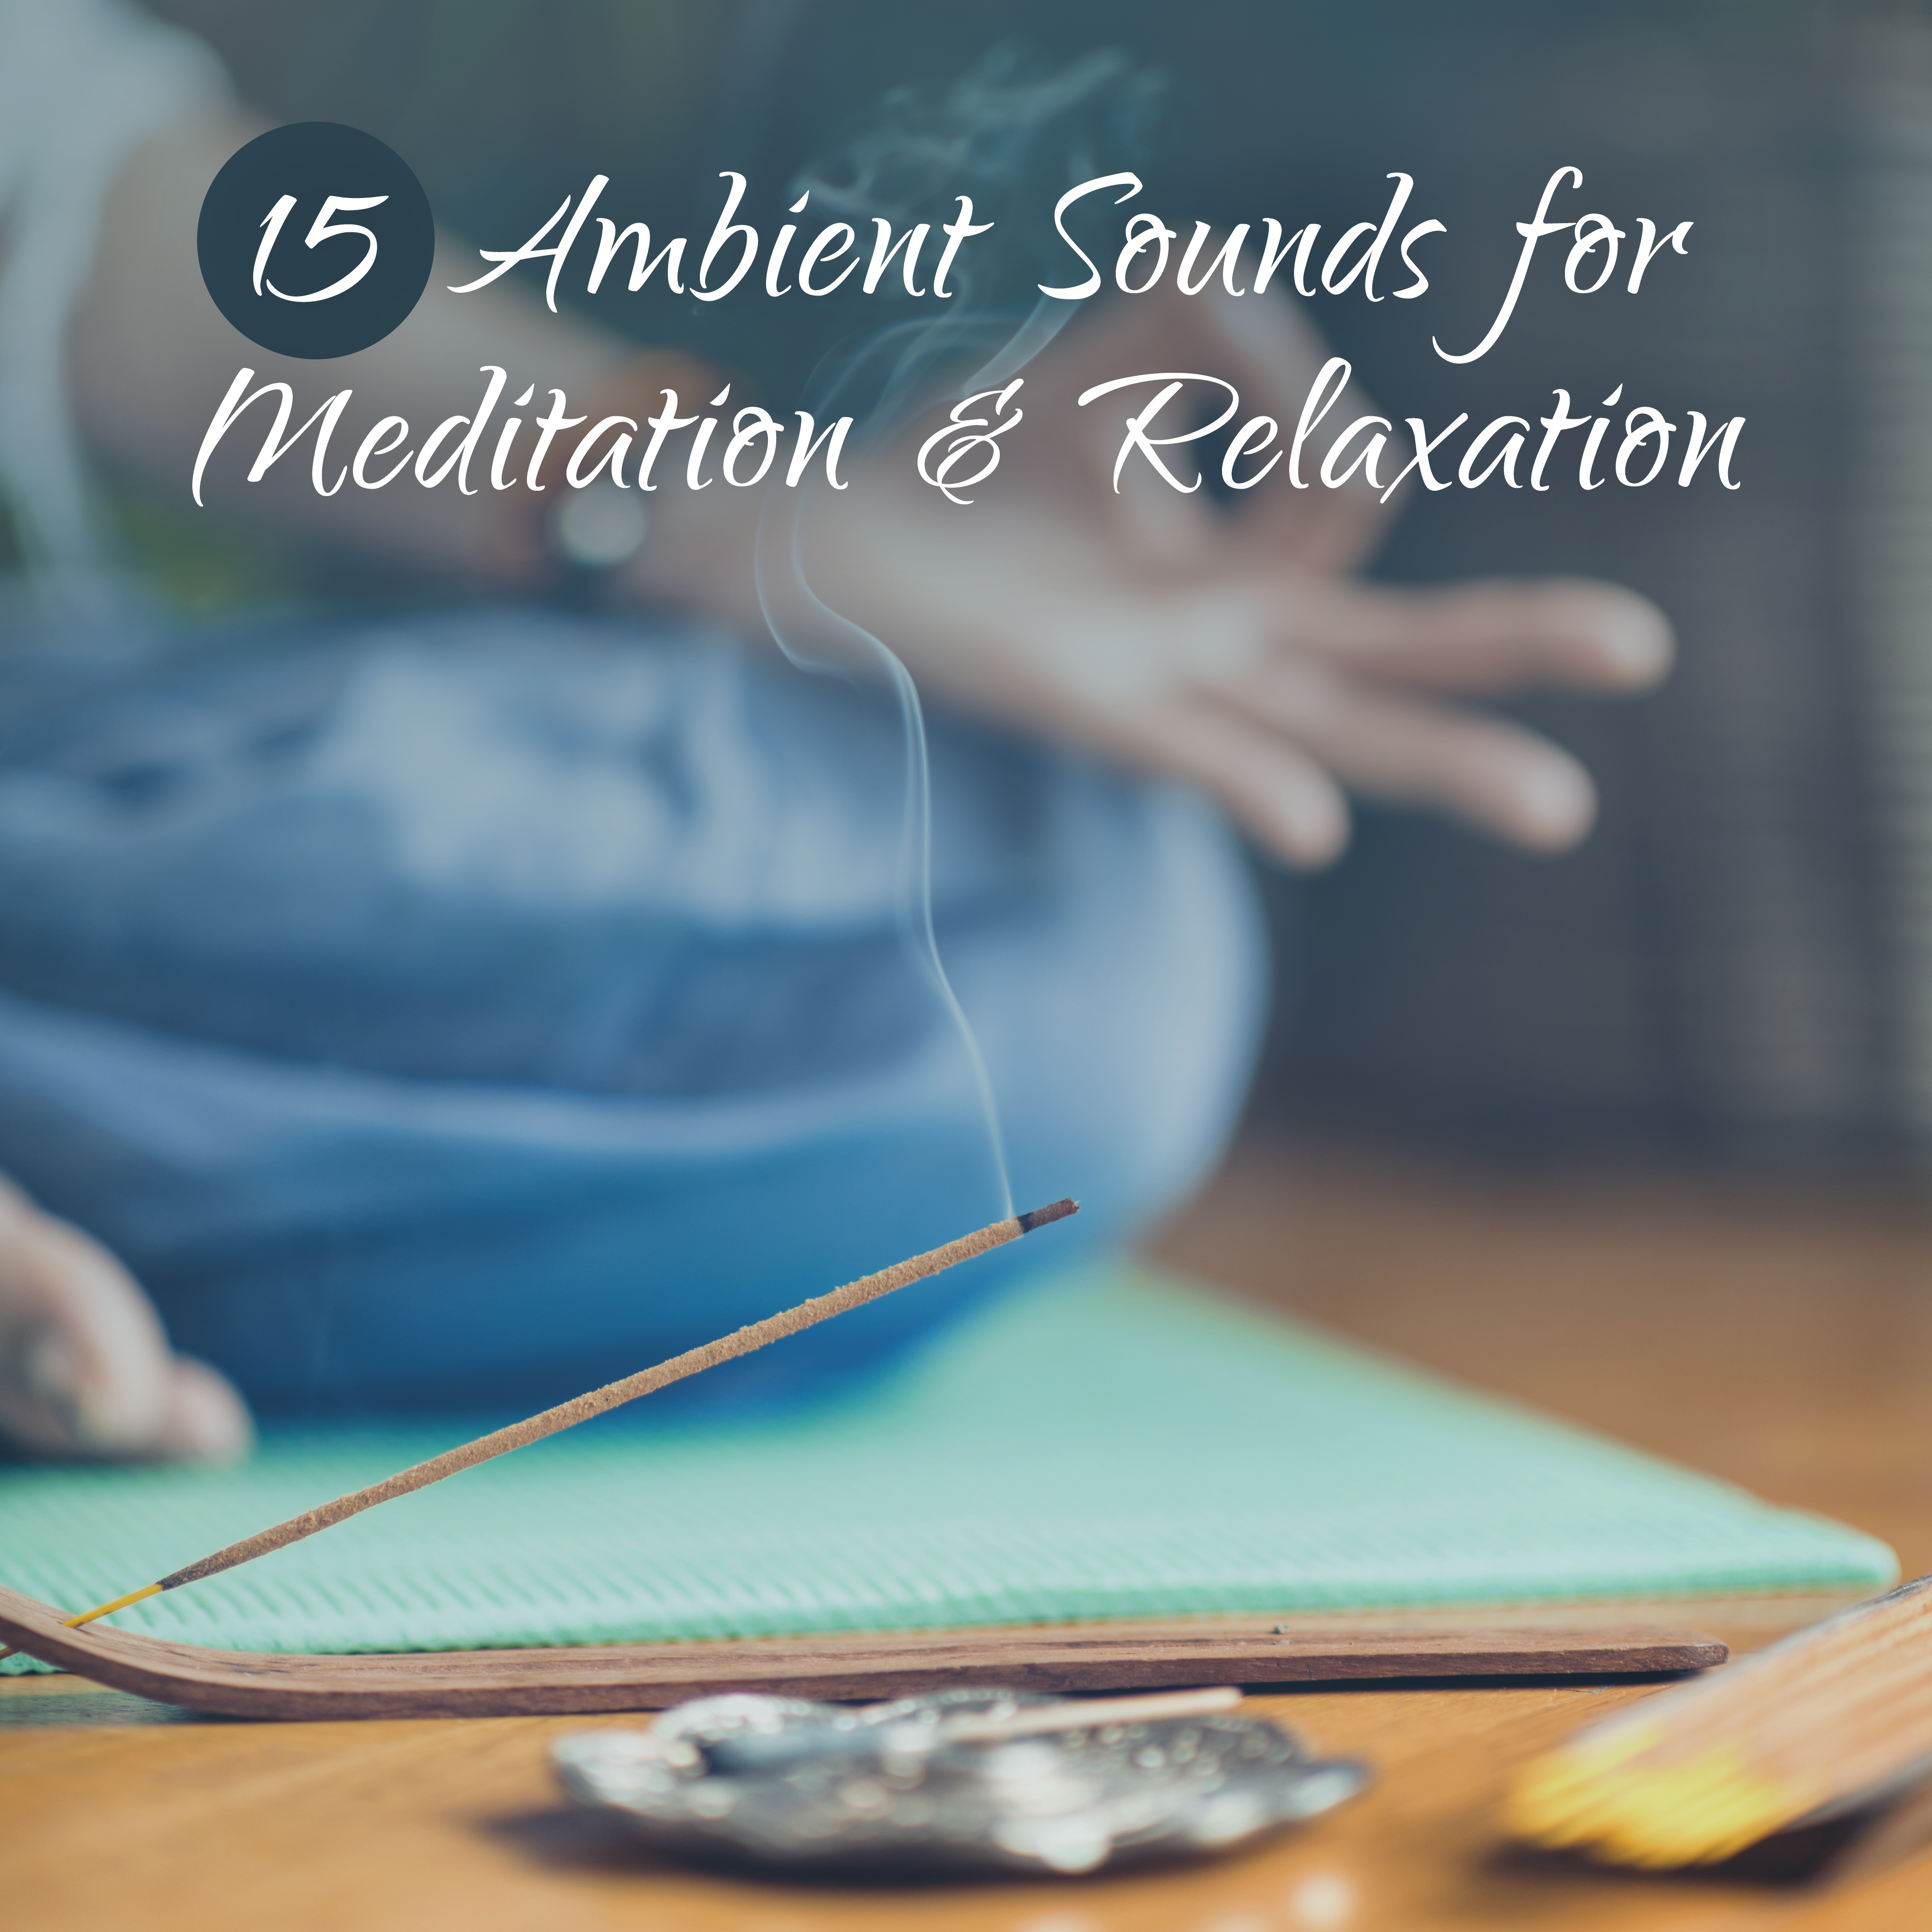 15 Ambient Sounds for Meditation & Relaxation – Pure Melodies to Calm Down, Relaxing Sleep, Deep Meditation, Yoga Relaxation, Asian Chillout Lounge